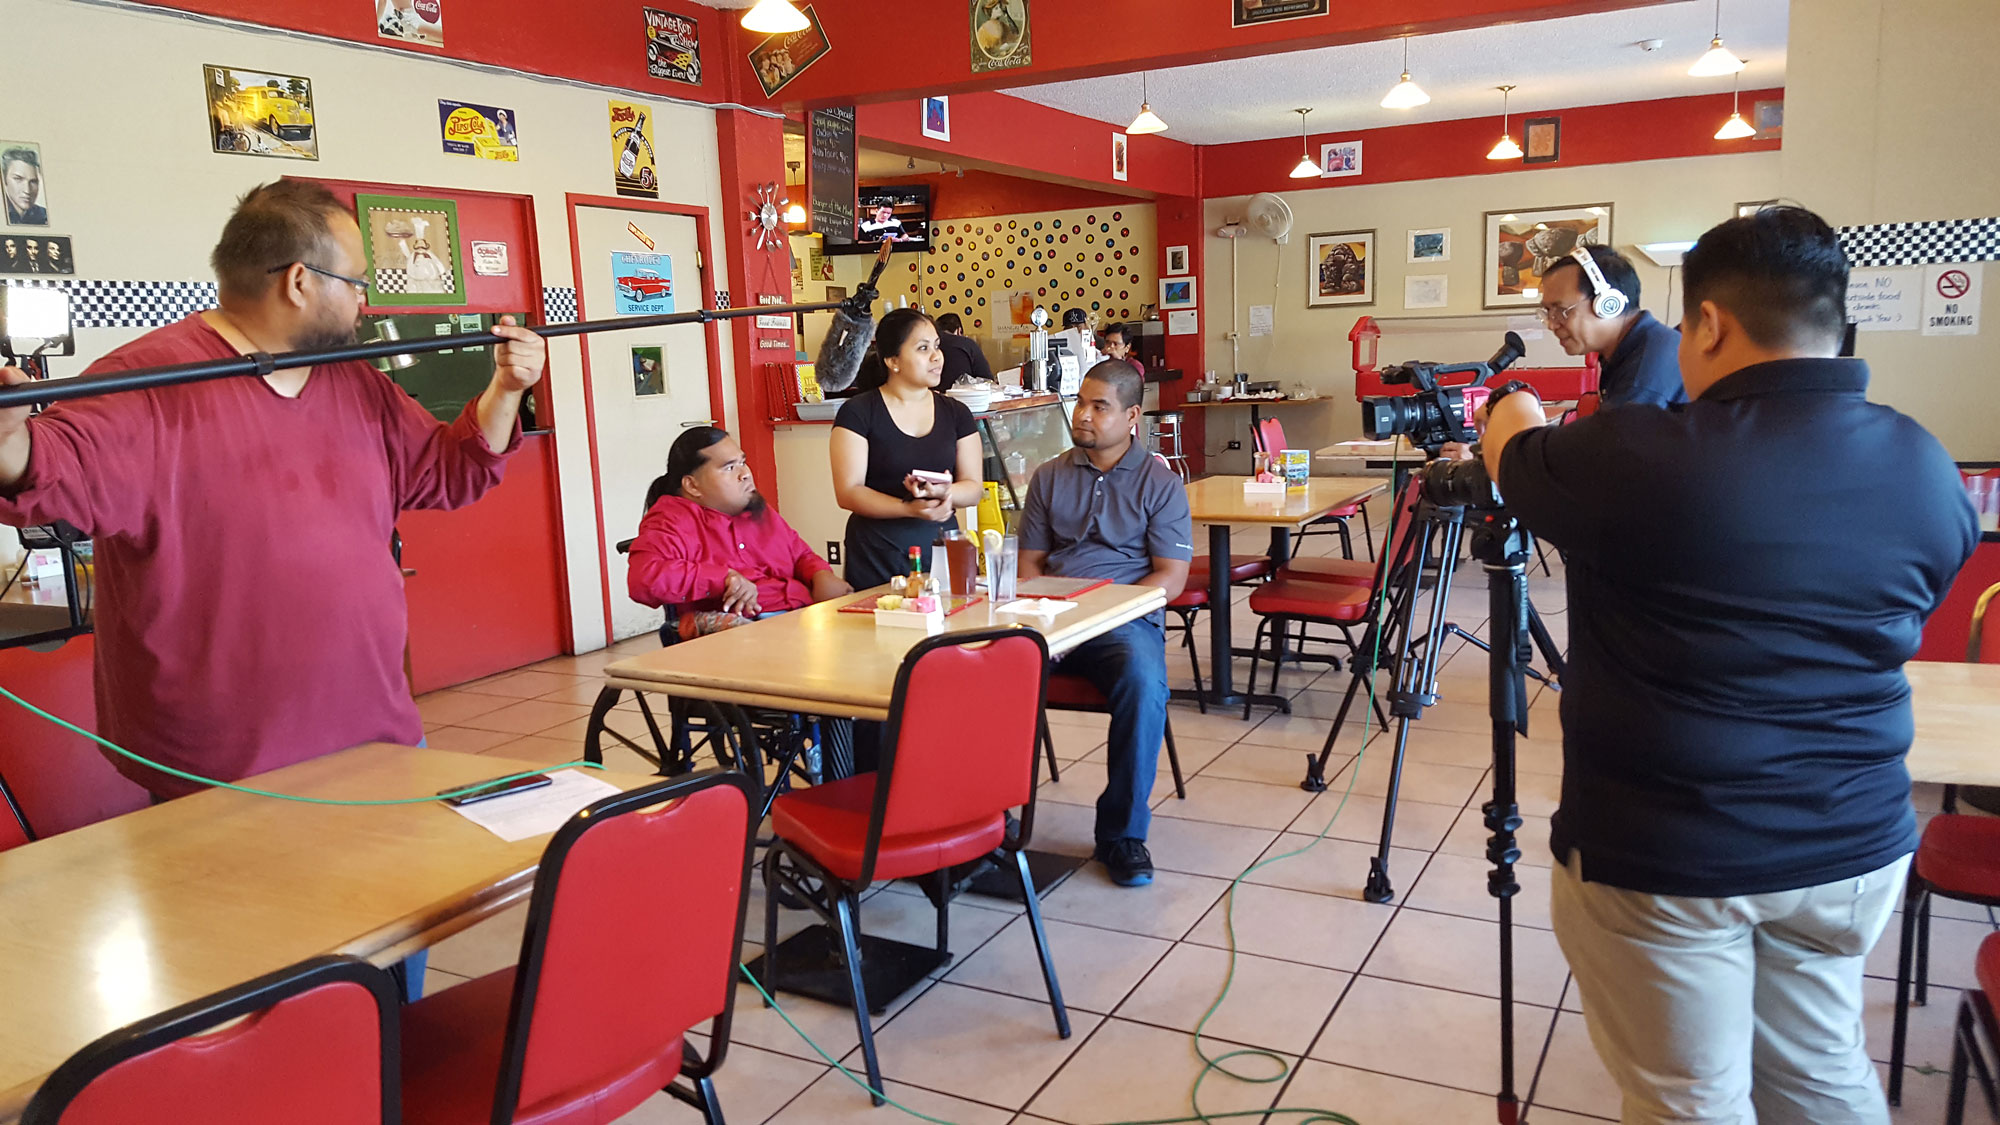 PBS Guam and Ron’s Diner assisted in filming scenes for “Ta Fan Acomprendi: Communicating with People with Disabilities,” on June 8.  Pictured at the table from left to right: Moses Puas, Self-Advocate; Christina Cabrera, Ron’s Diner Representative; and Wansesty Yalismwar, Personal Care Attendant.